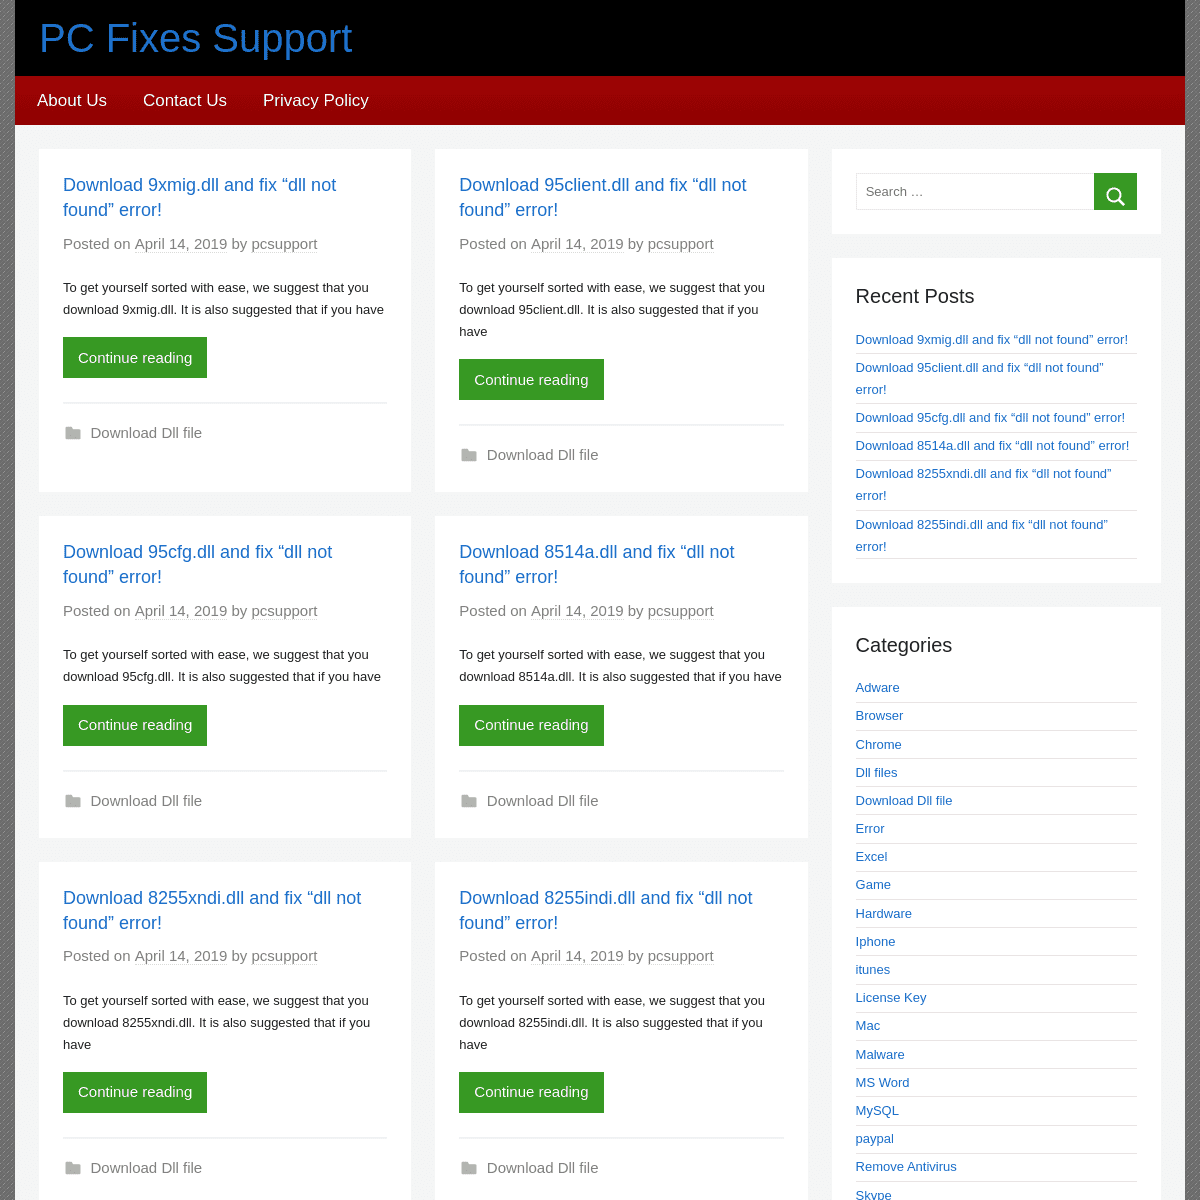 A complete backup of pcfixessupport.com